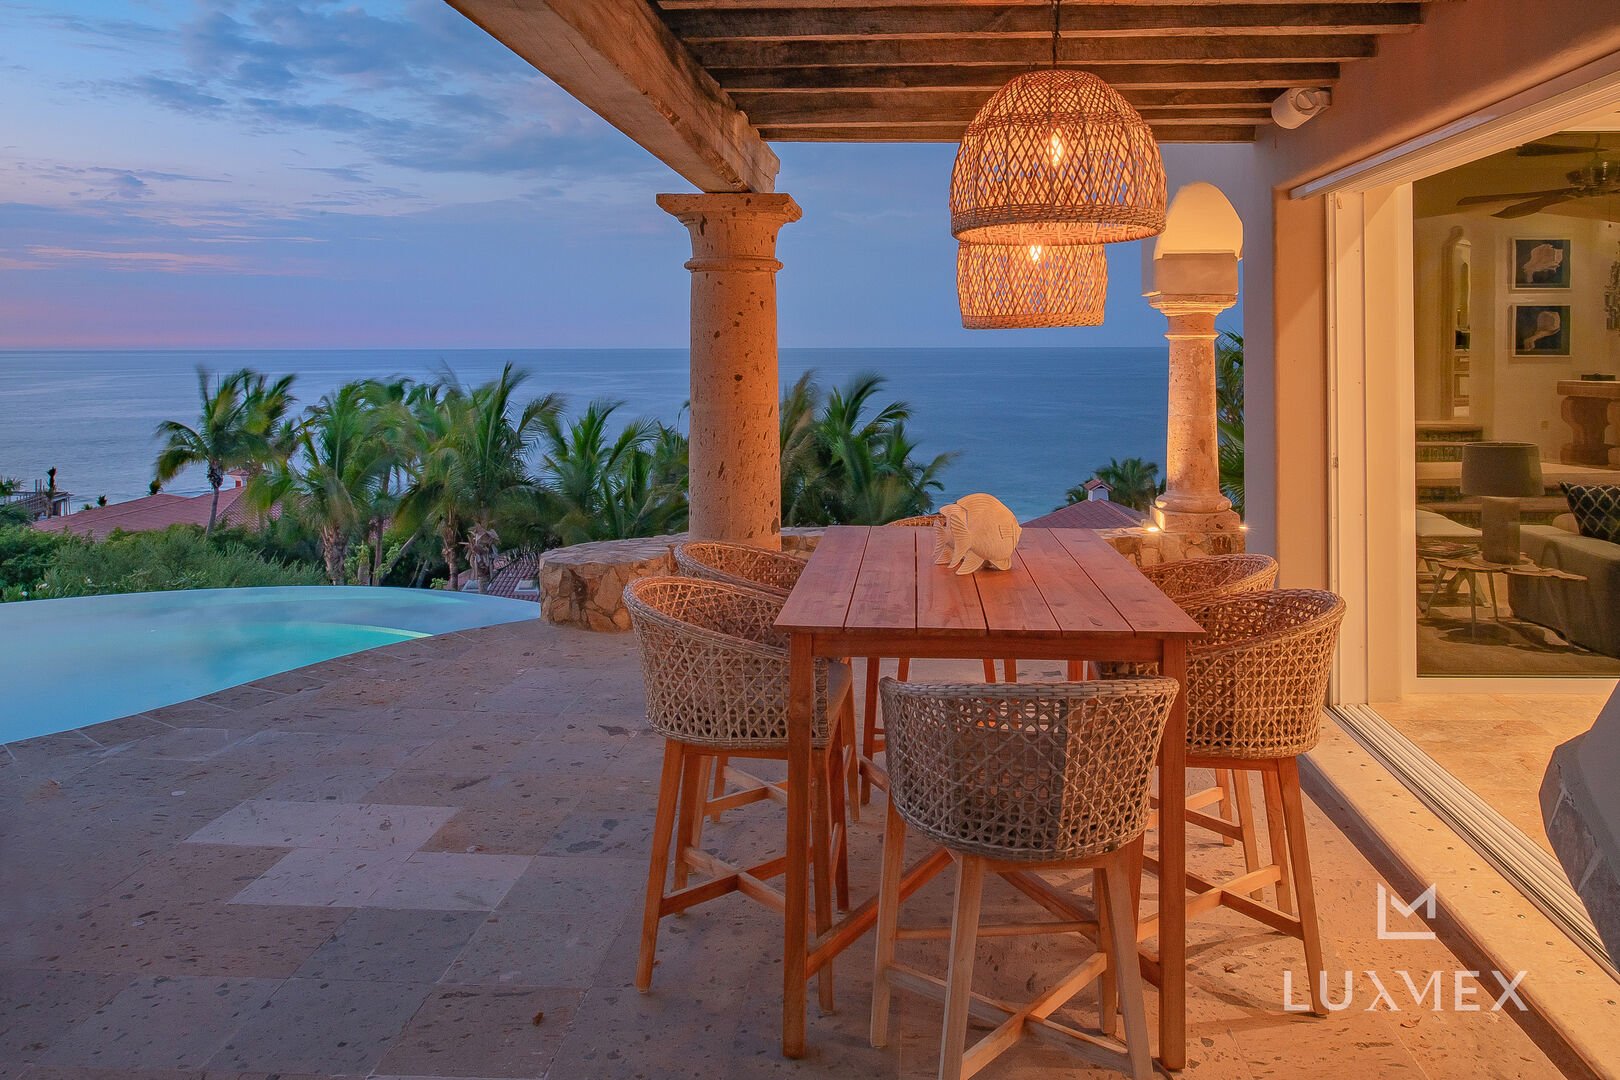 A high table and chairs sits on the patio at sunset.